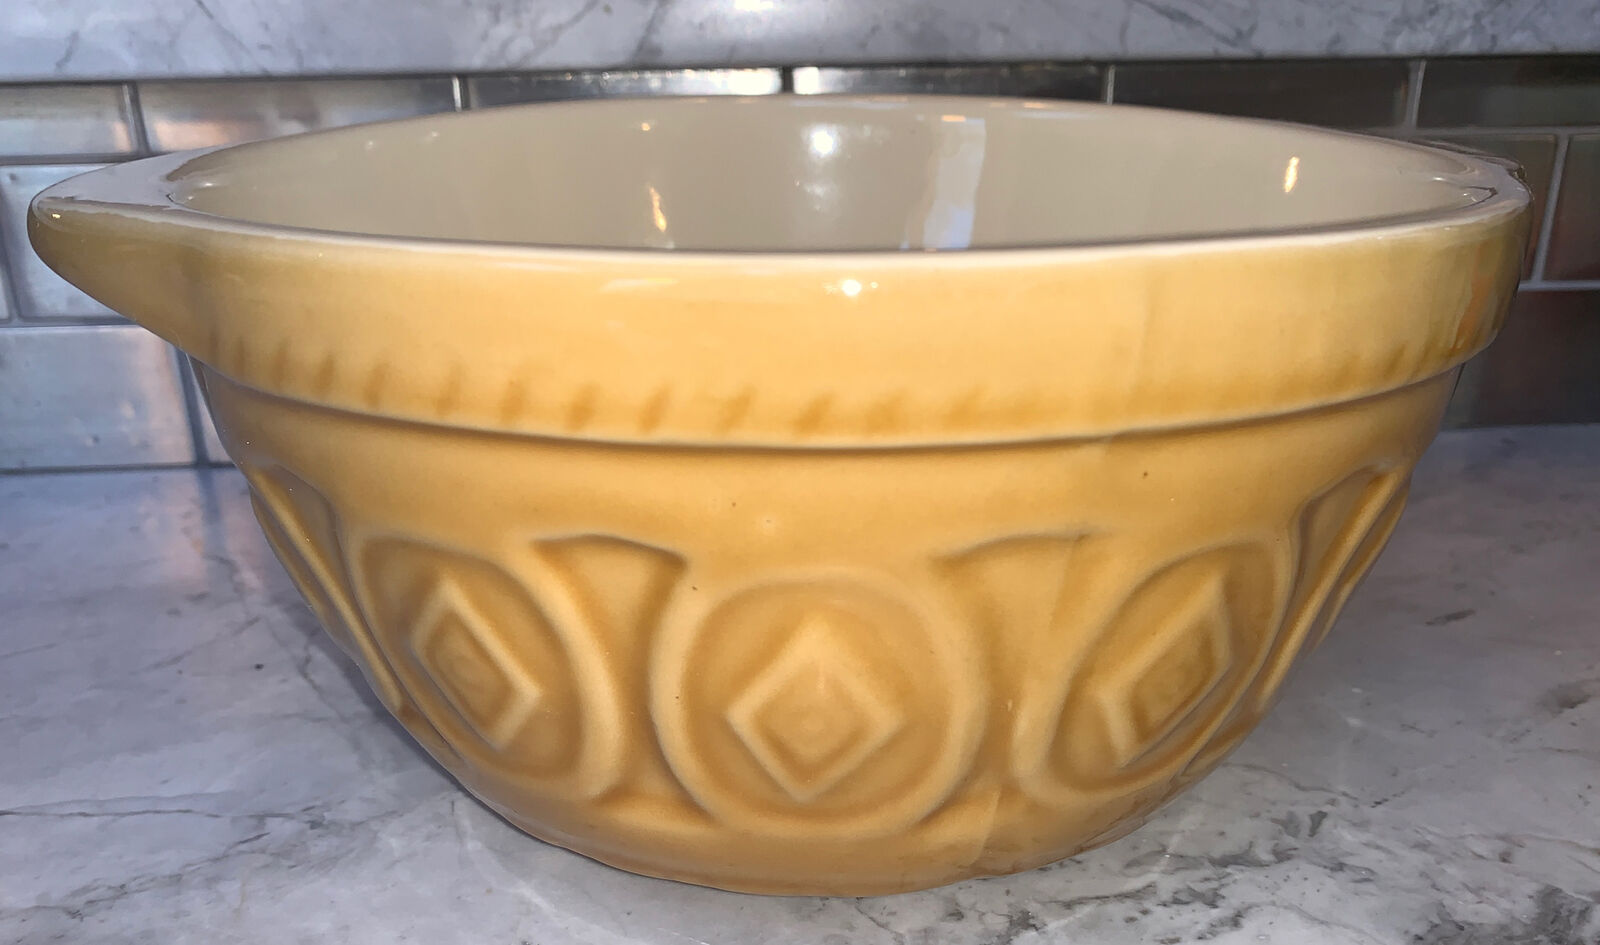 Great British Traditions Mixing Bowl with Gripstand Bottom Tan Gold VG condition